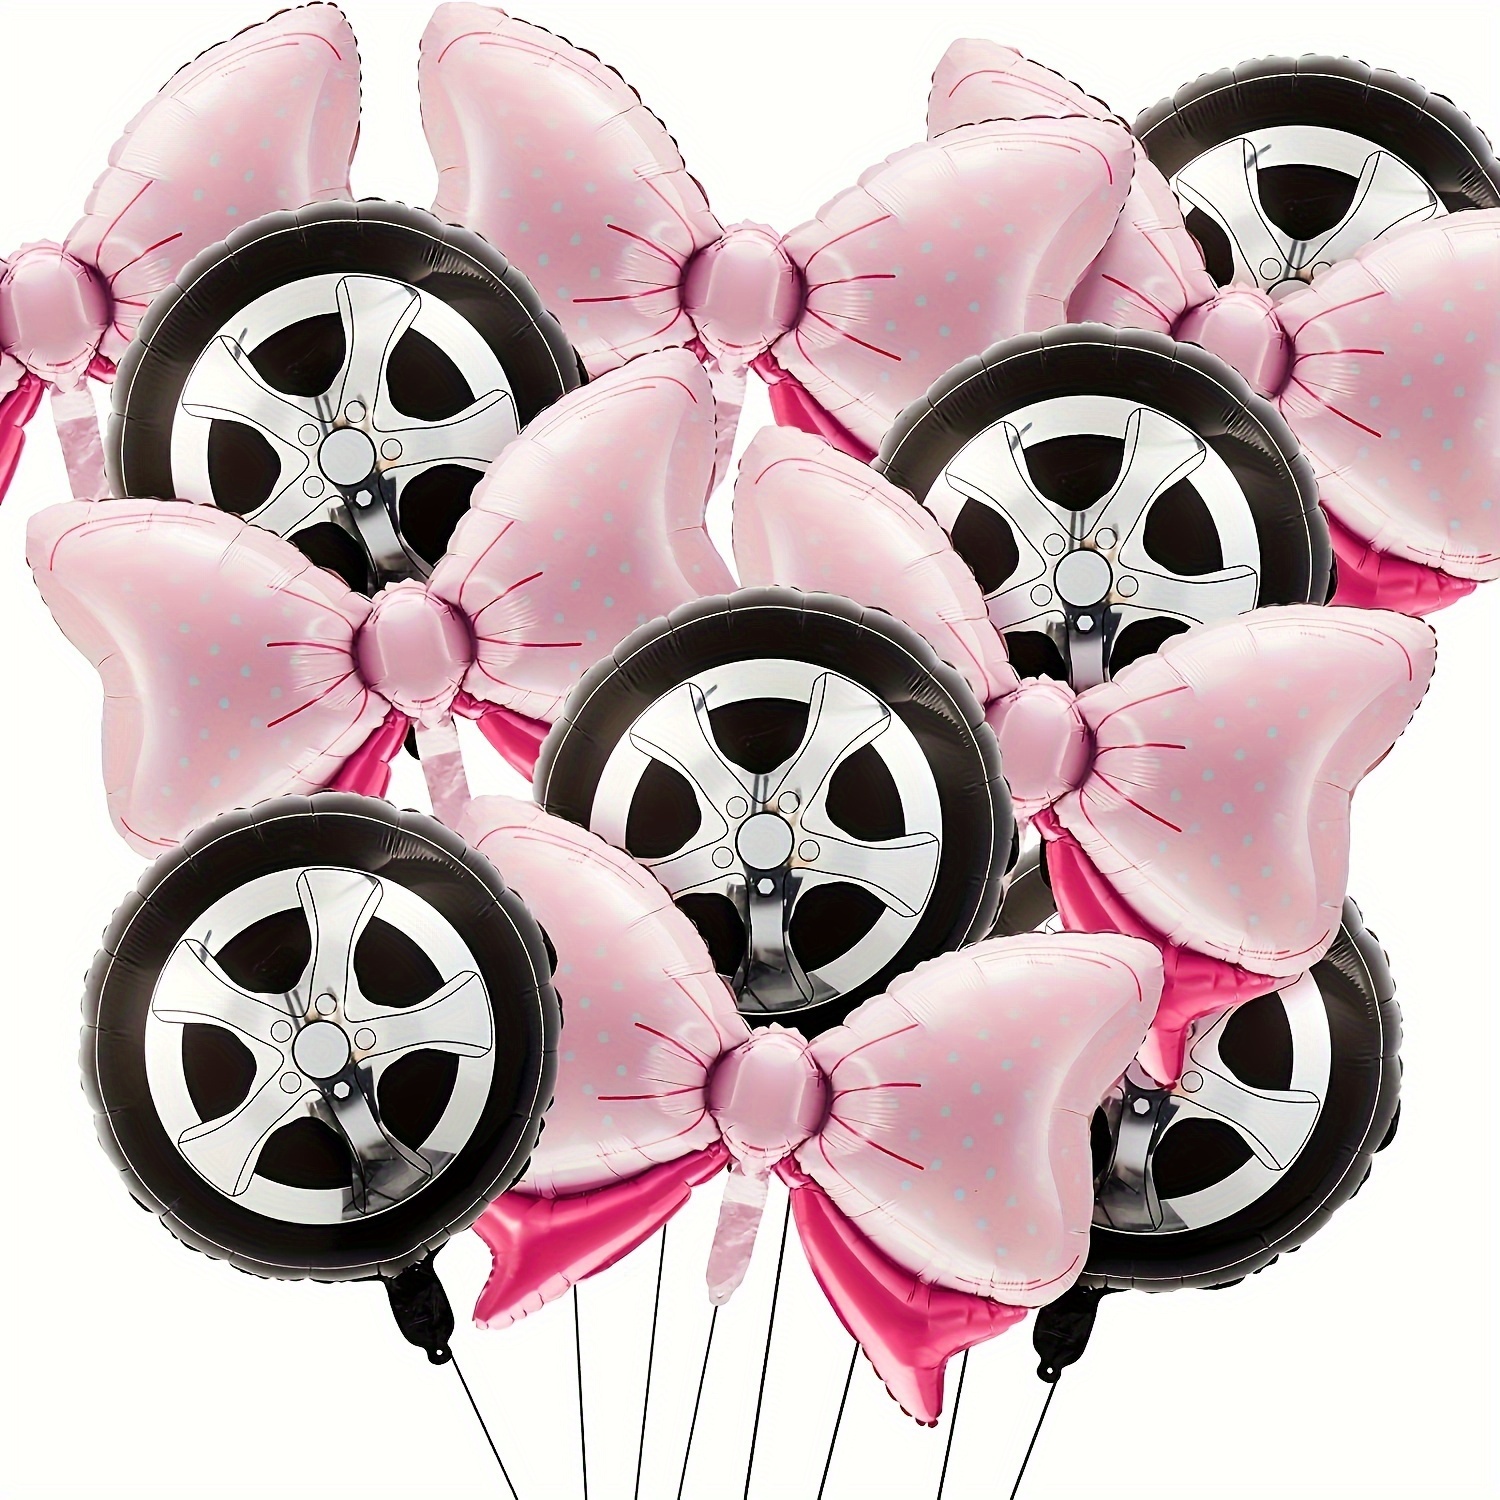 

12pcs Black And White Wheels Pink Bow Aluminum Film Balloon Set, Camping Theme Party Arrangement Decoration, Graduation Bridal Gift, Party Background Decoration, Wedding Birthday Party Supplies